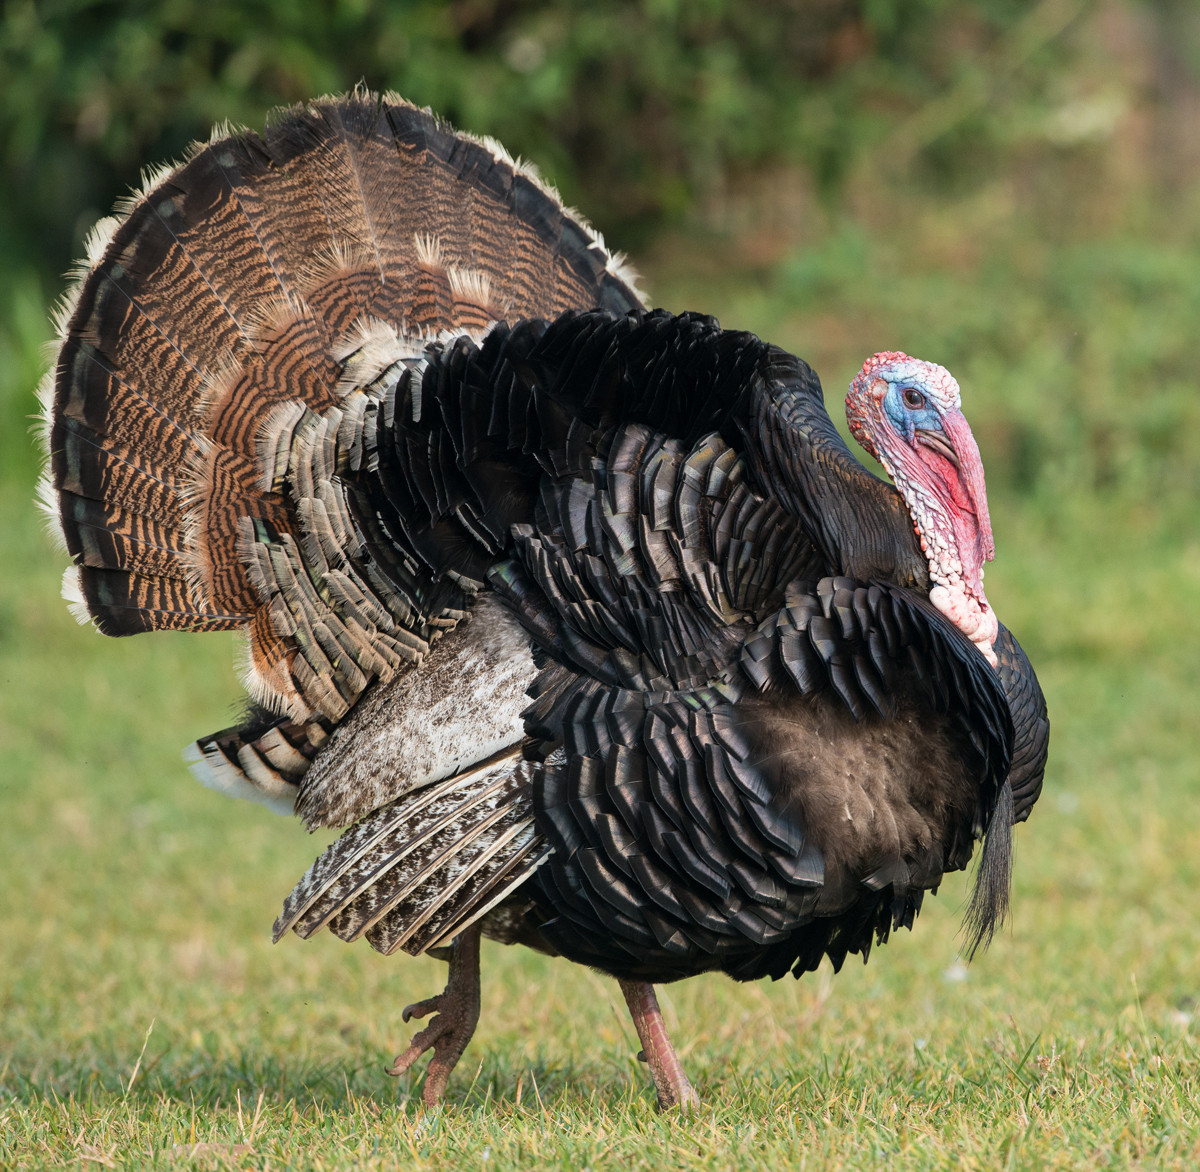 Turkey Images For Thanksgiving
 Angry Birds What You Need to Know About Turkeys This